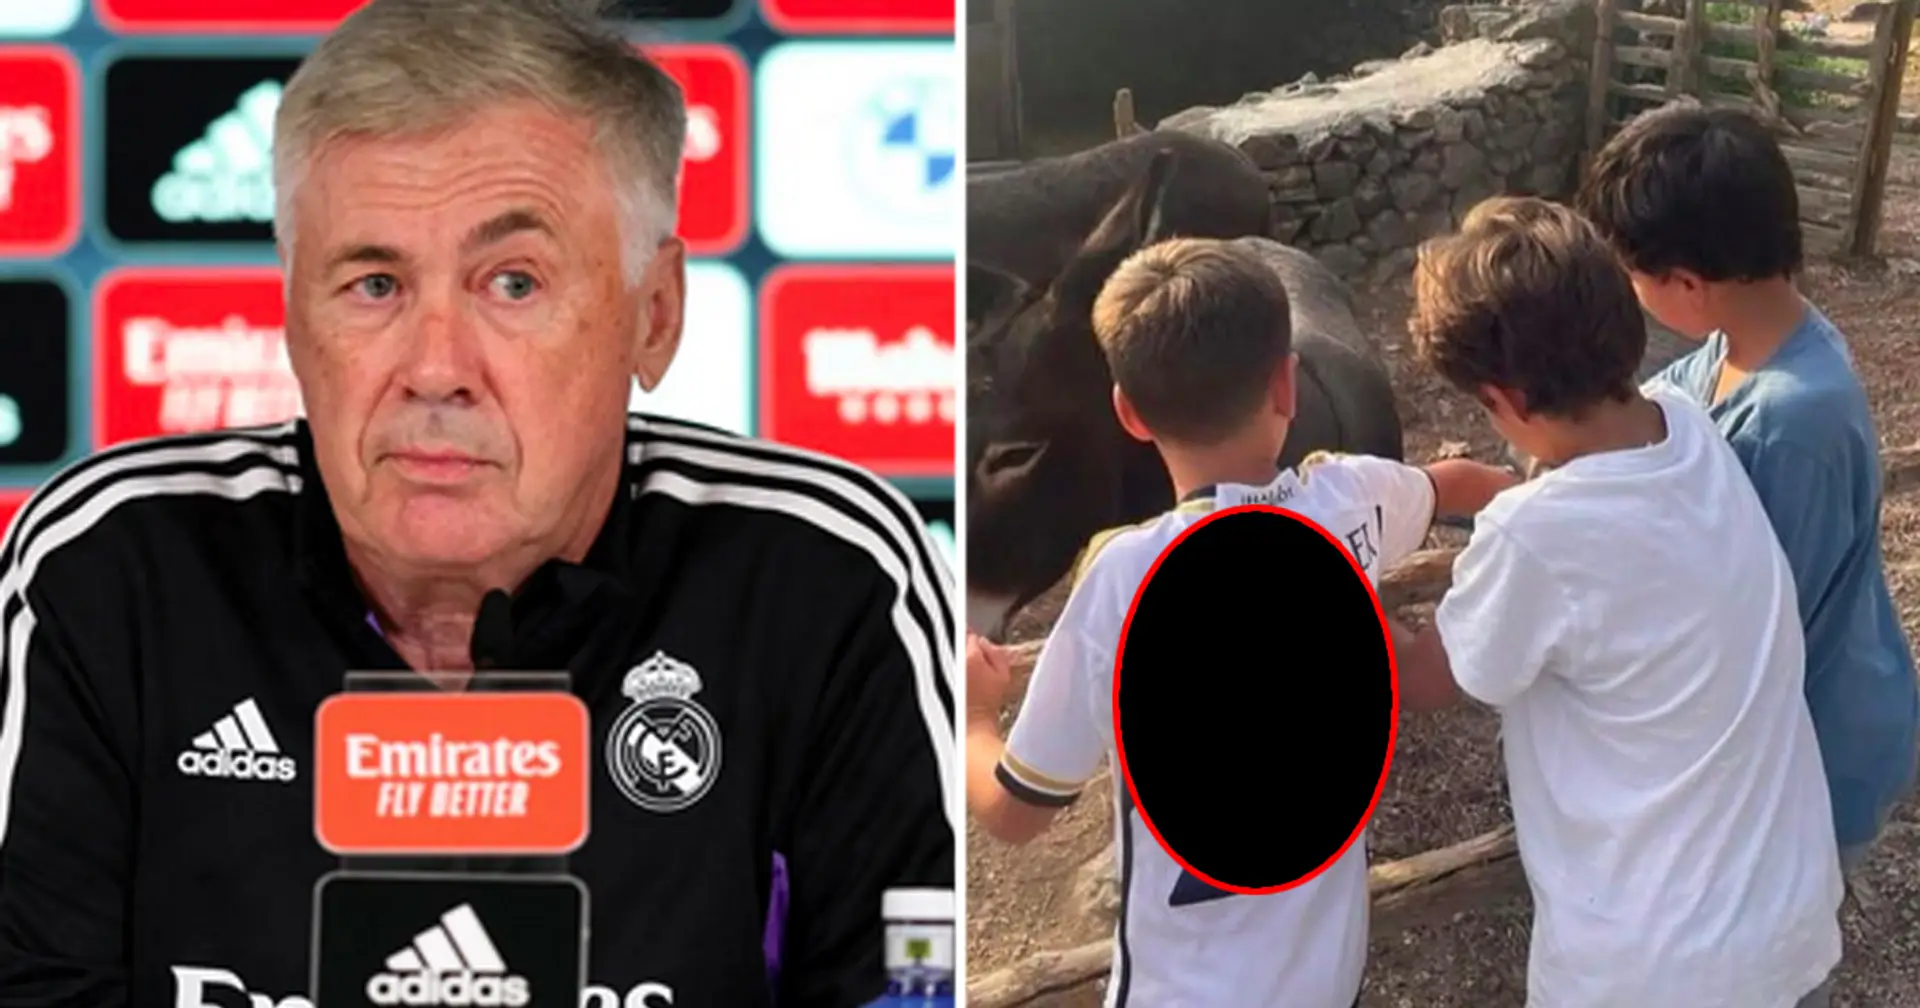 Spotted: Ancelotti's grandson wearing jersey of Real Madrid's new signing – not Bellingham